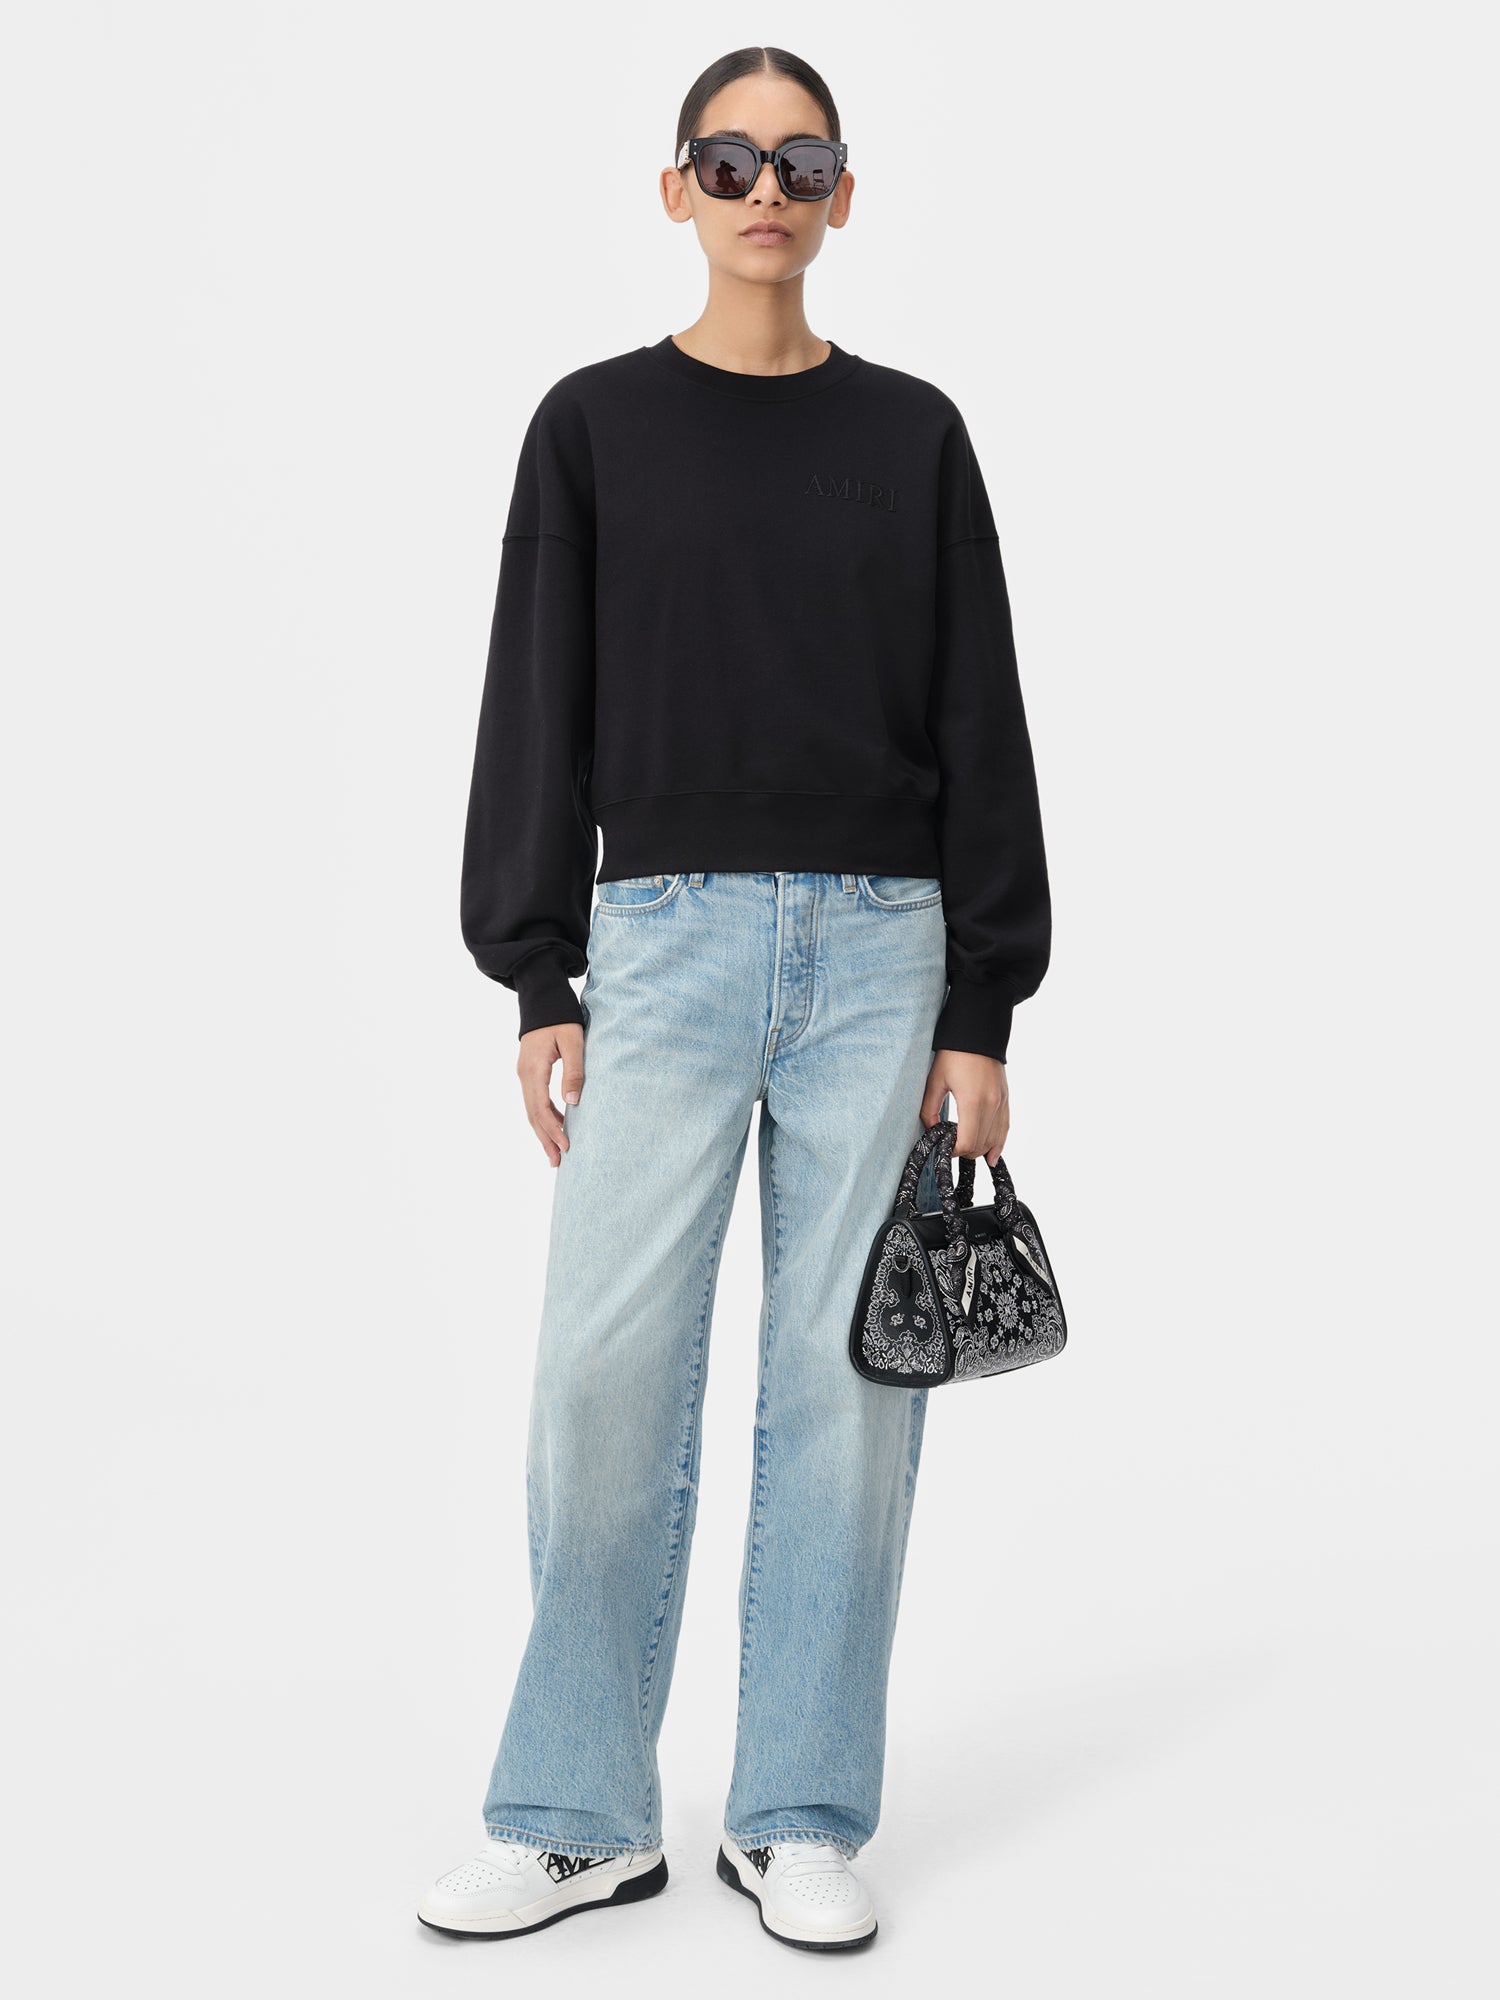 Product WOMEN - WOMEN'S AMIRI EMBROIDERED CREW - Black featured image